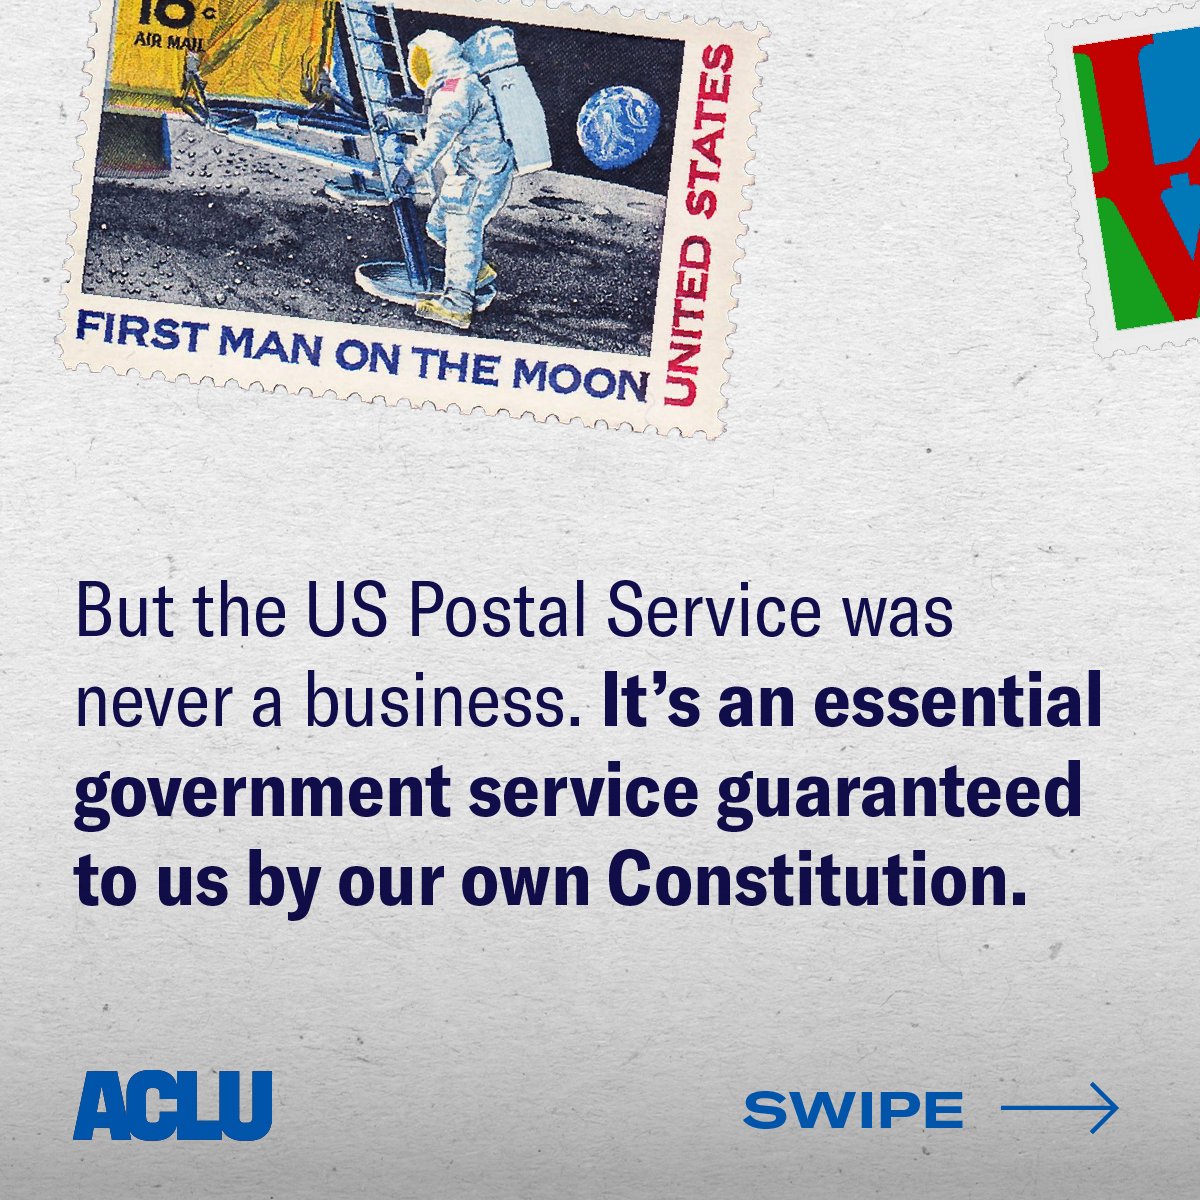 The USPS is critical every year — and this year we need it to provide COVID-19 information and supplies, deliver medication and unemployment benefits, and ensure that we can all vote by mail.